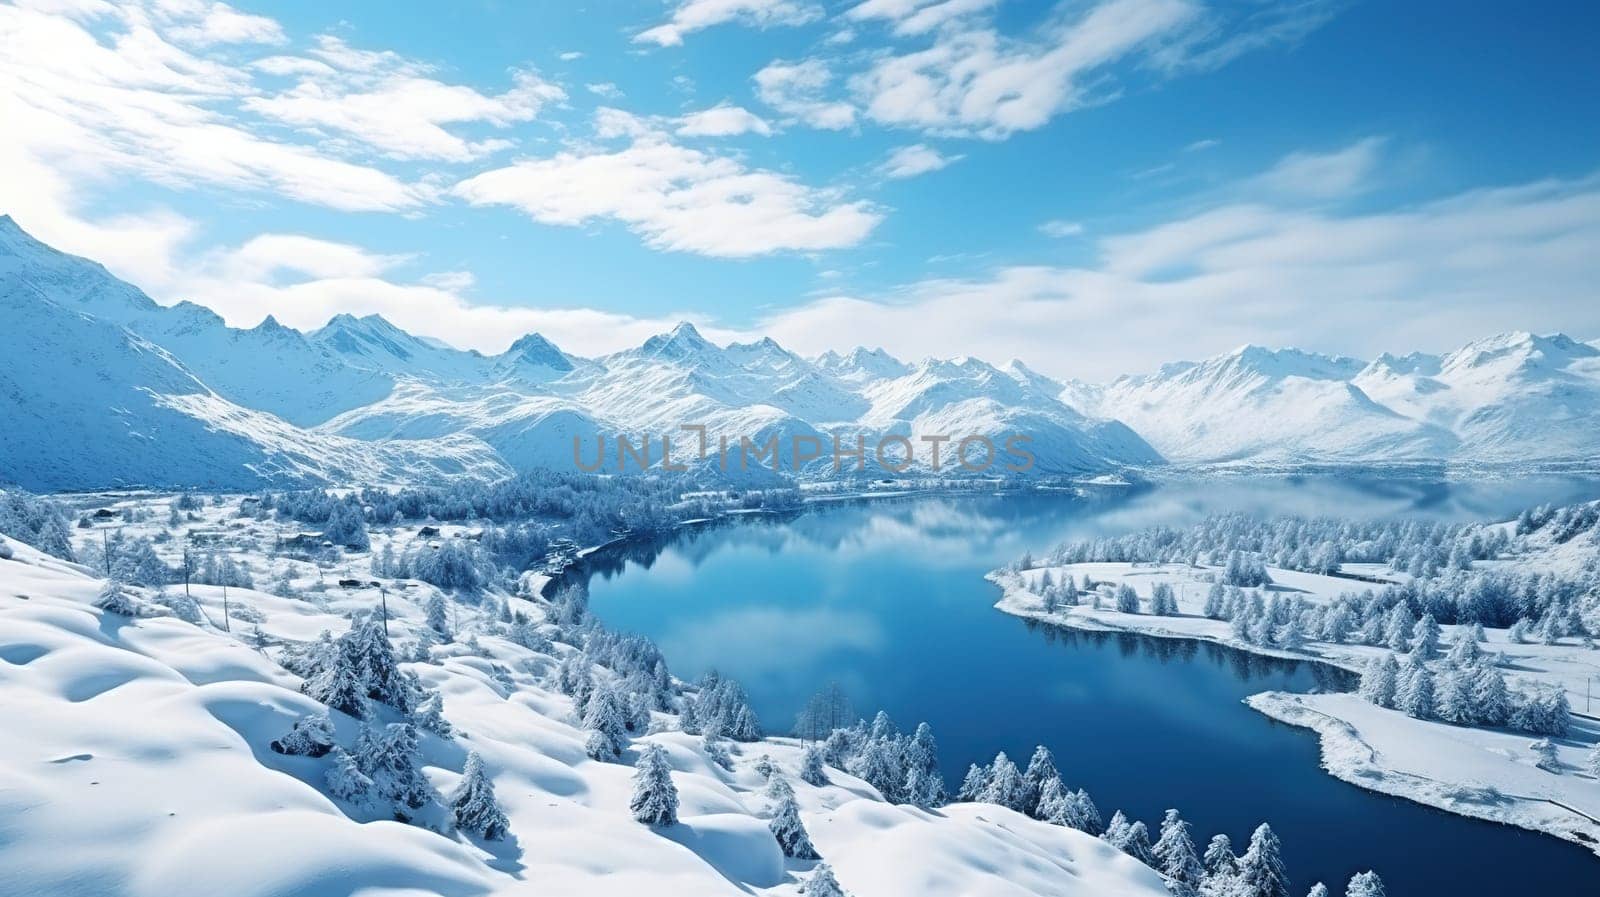 Beautiful winter landscape of snow-capped mountains and river.